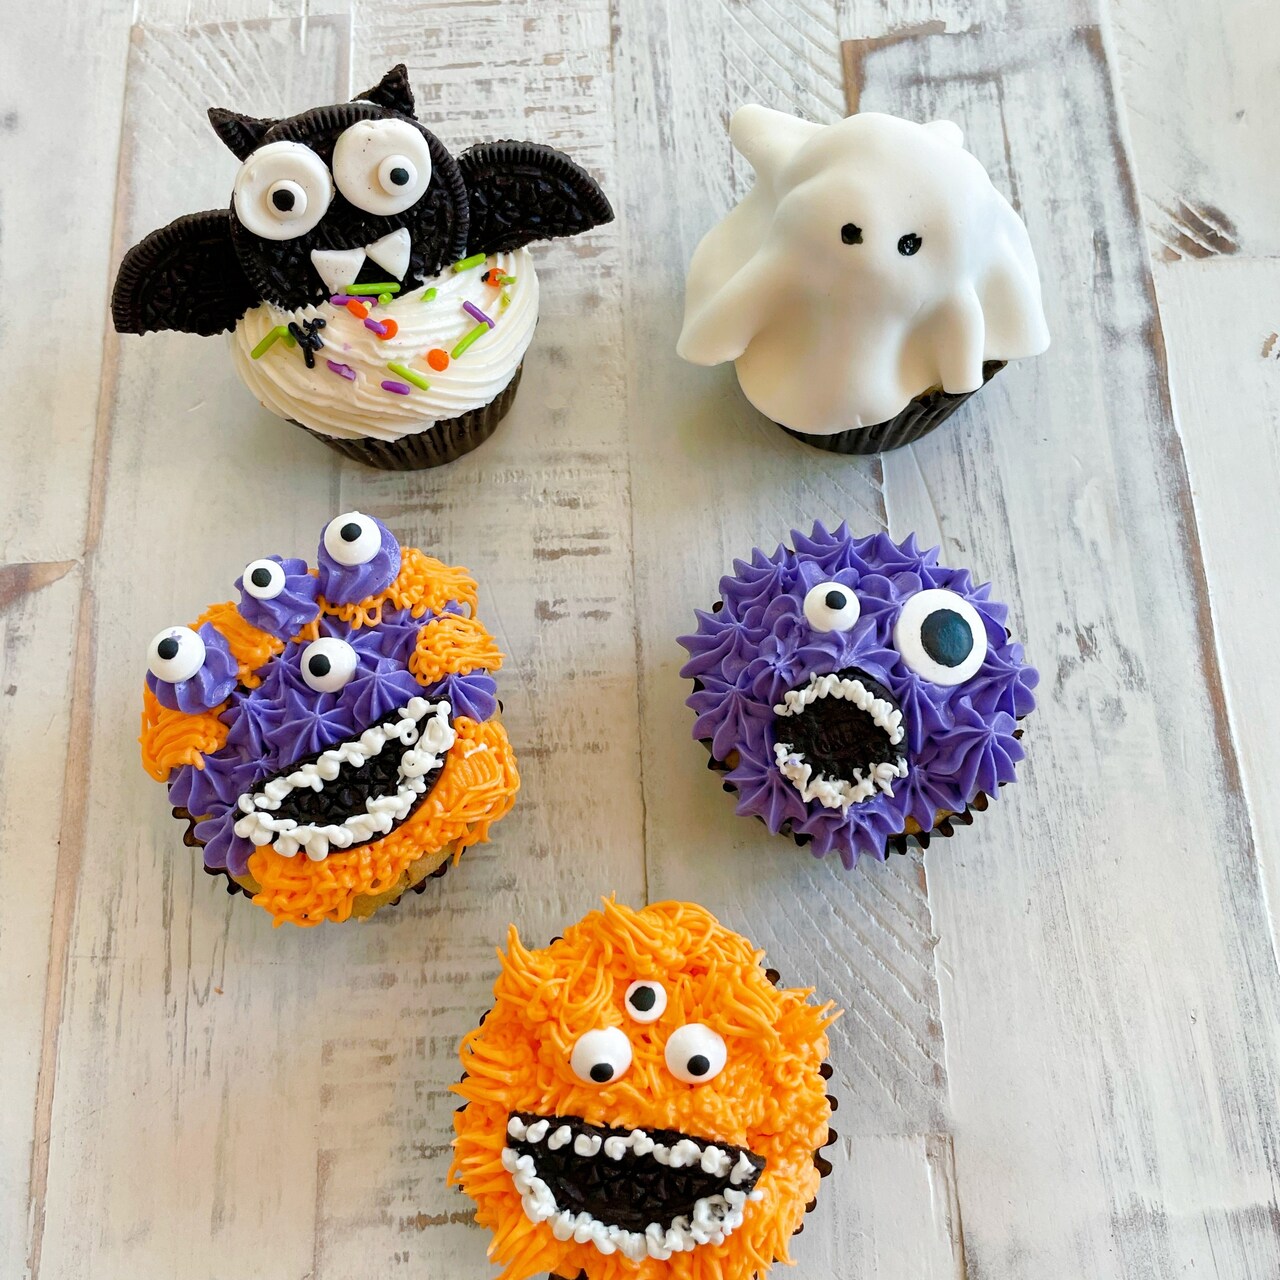 Monster Halloween Cupcakes with @wildbakes